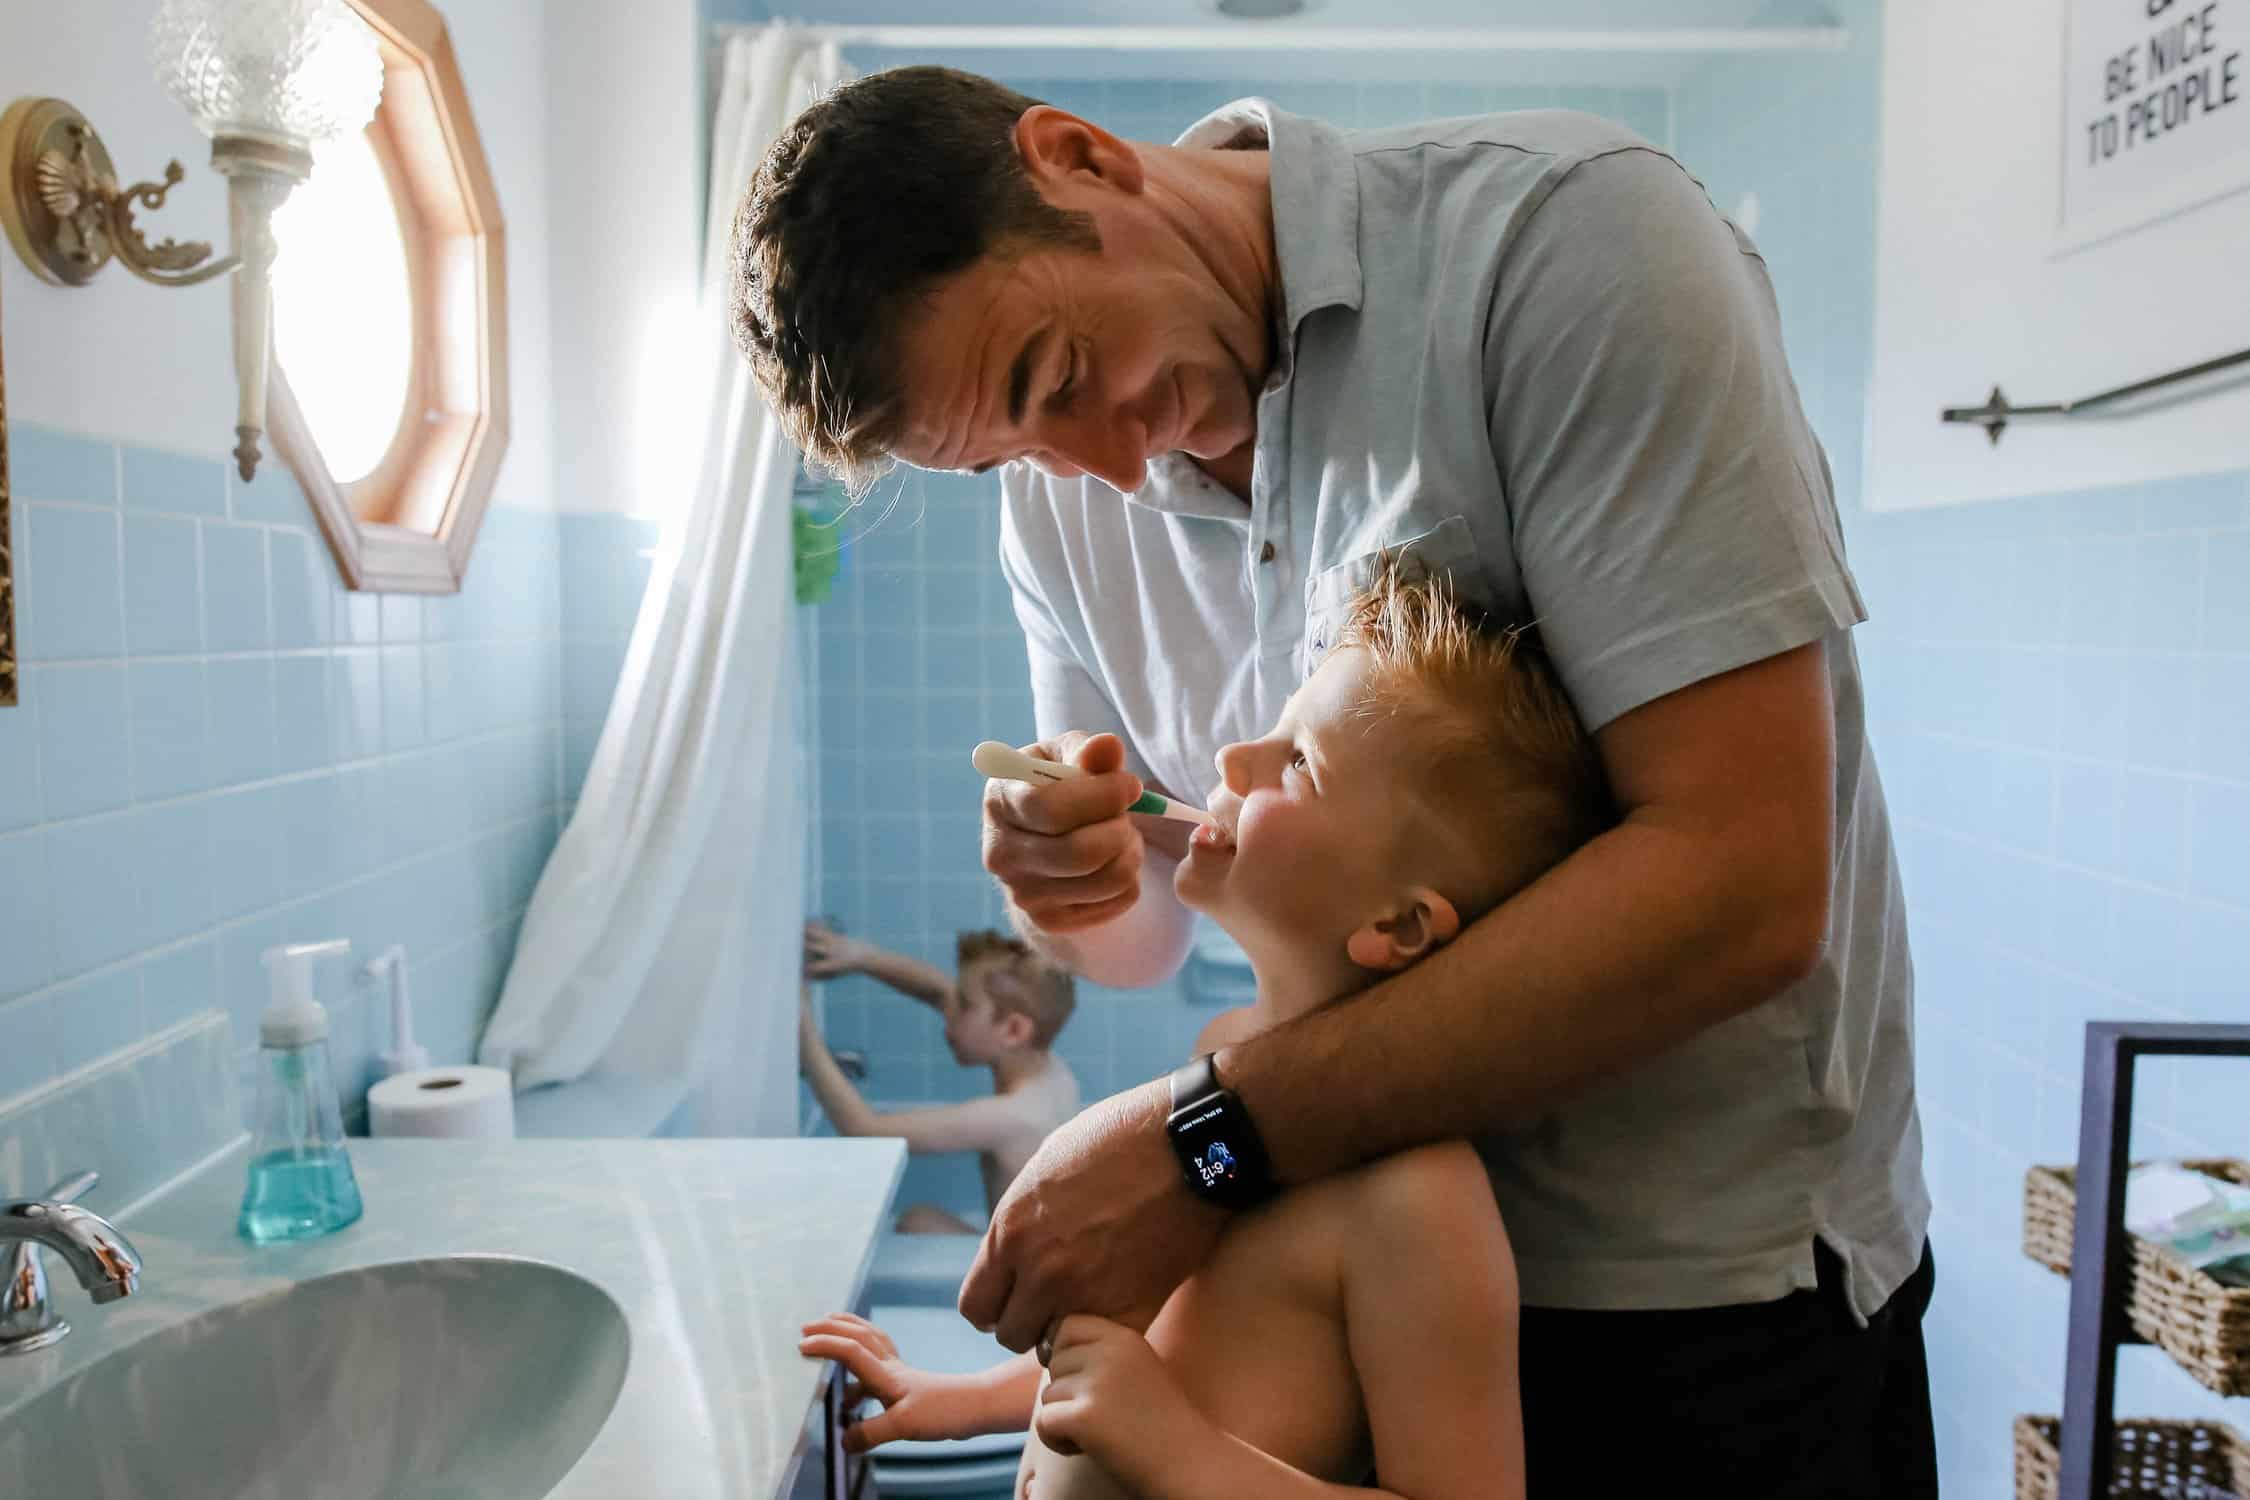 a dad helping his young son brush his teeth